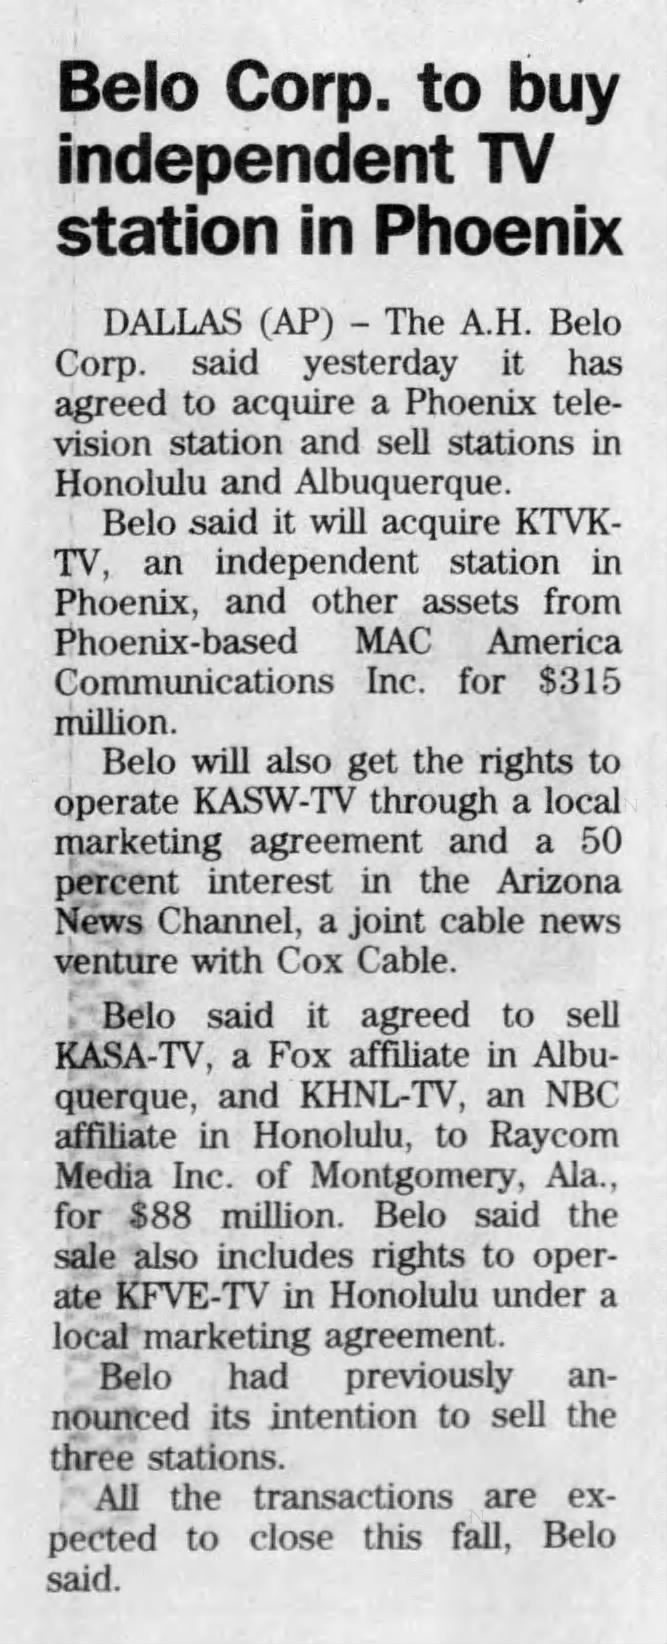 Belo Corp. to buy independent TV station in Phoenix